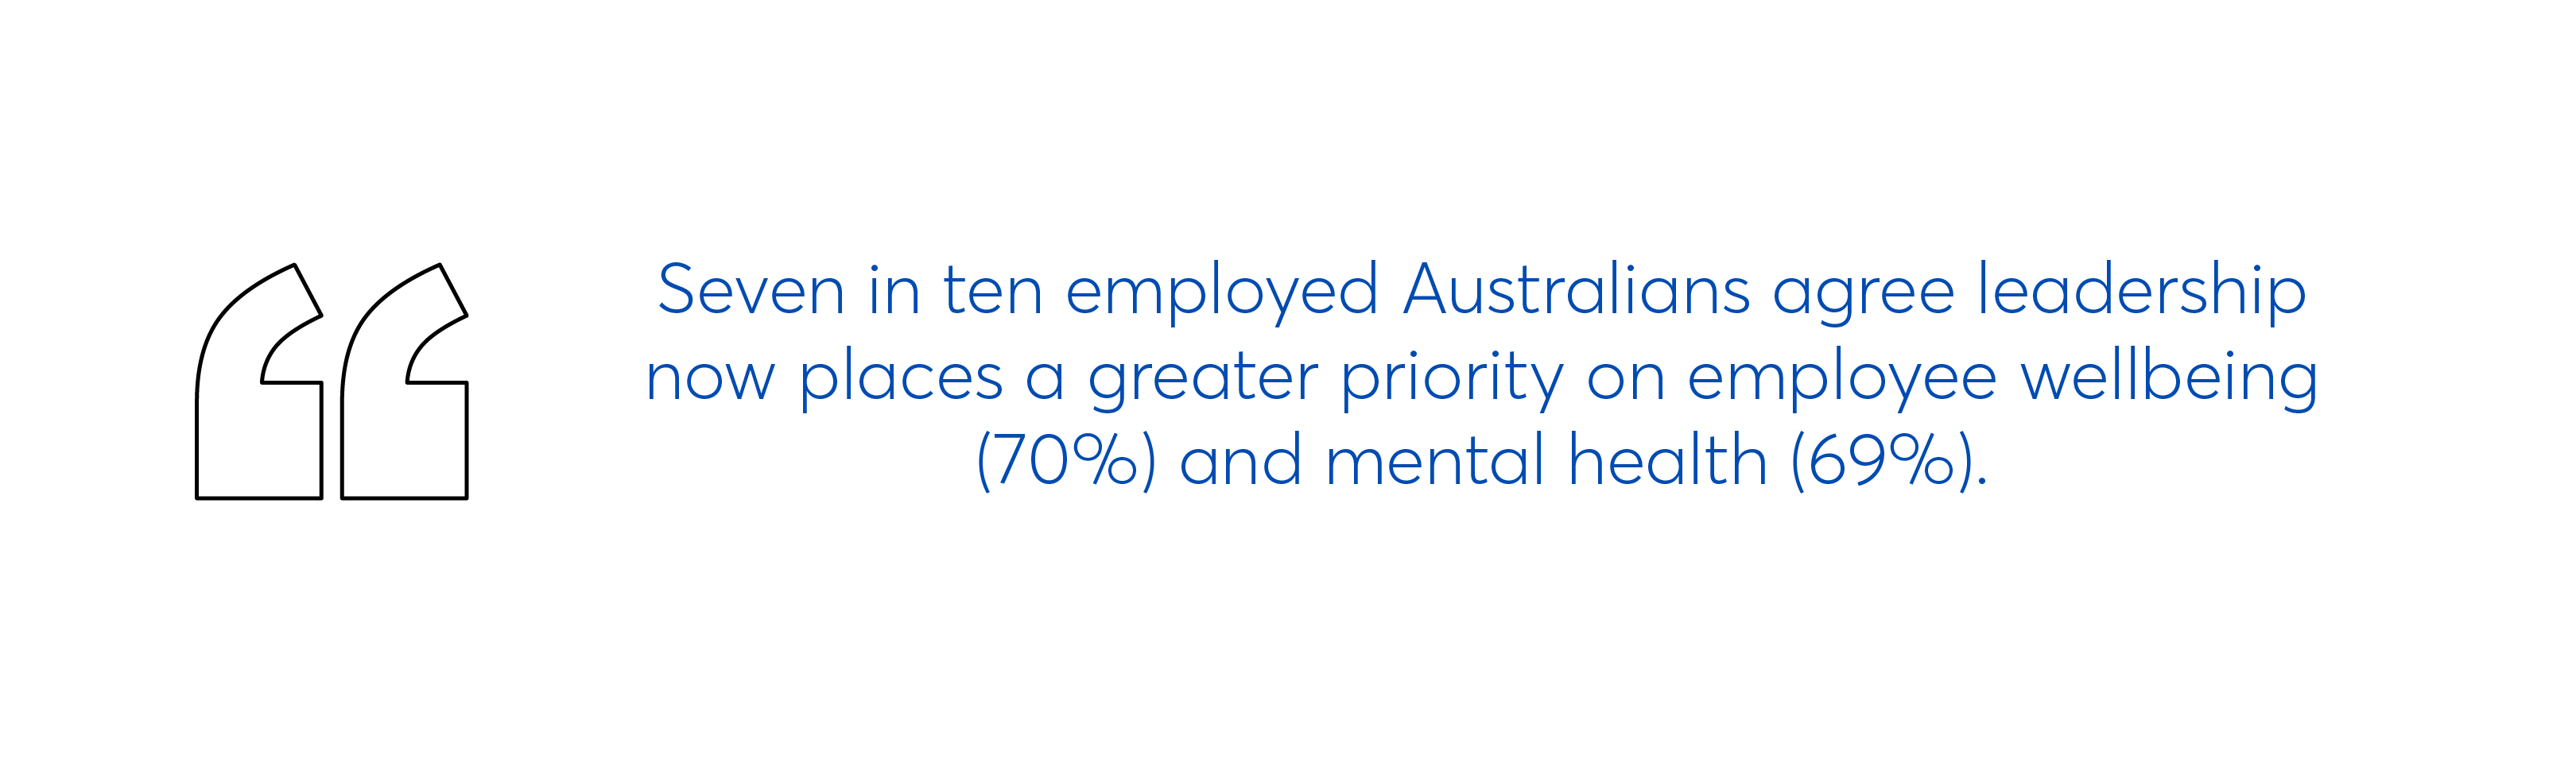 Greater priority on mental health